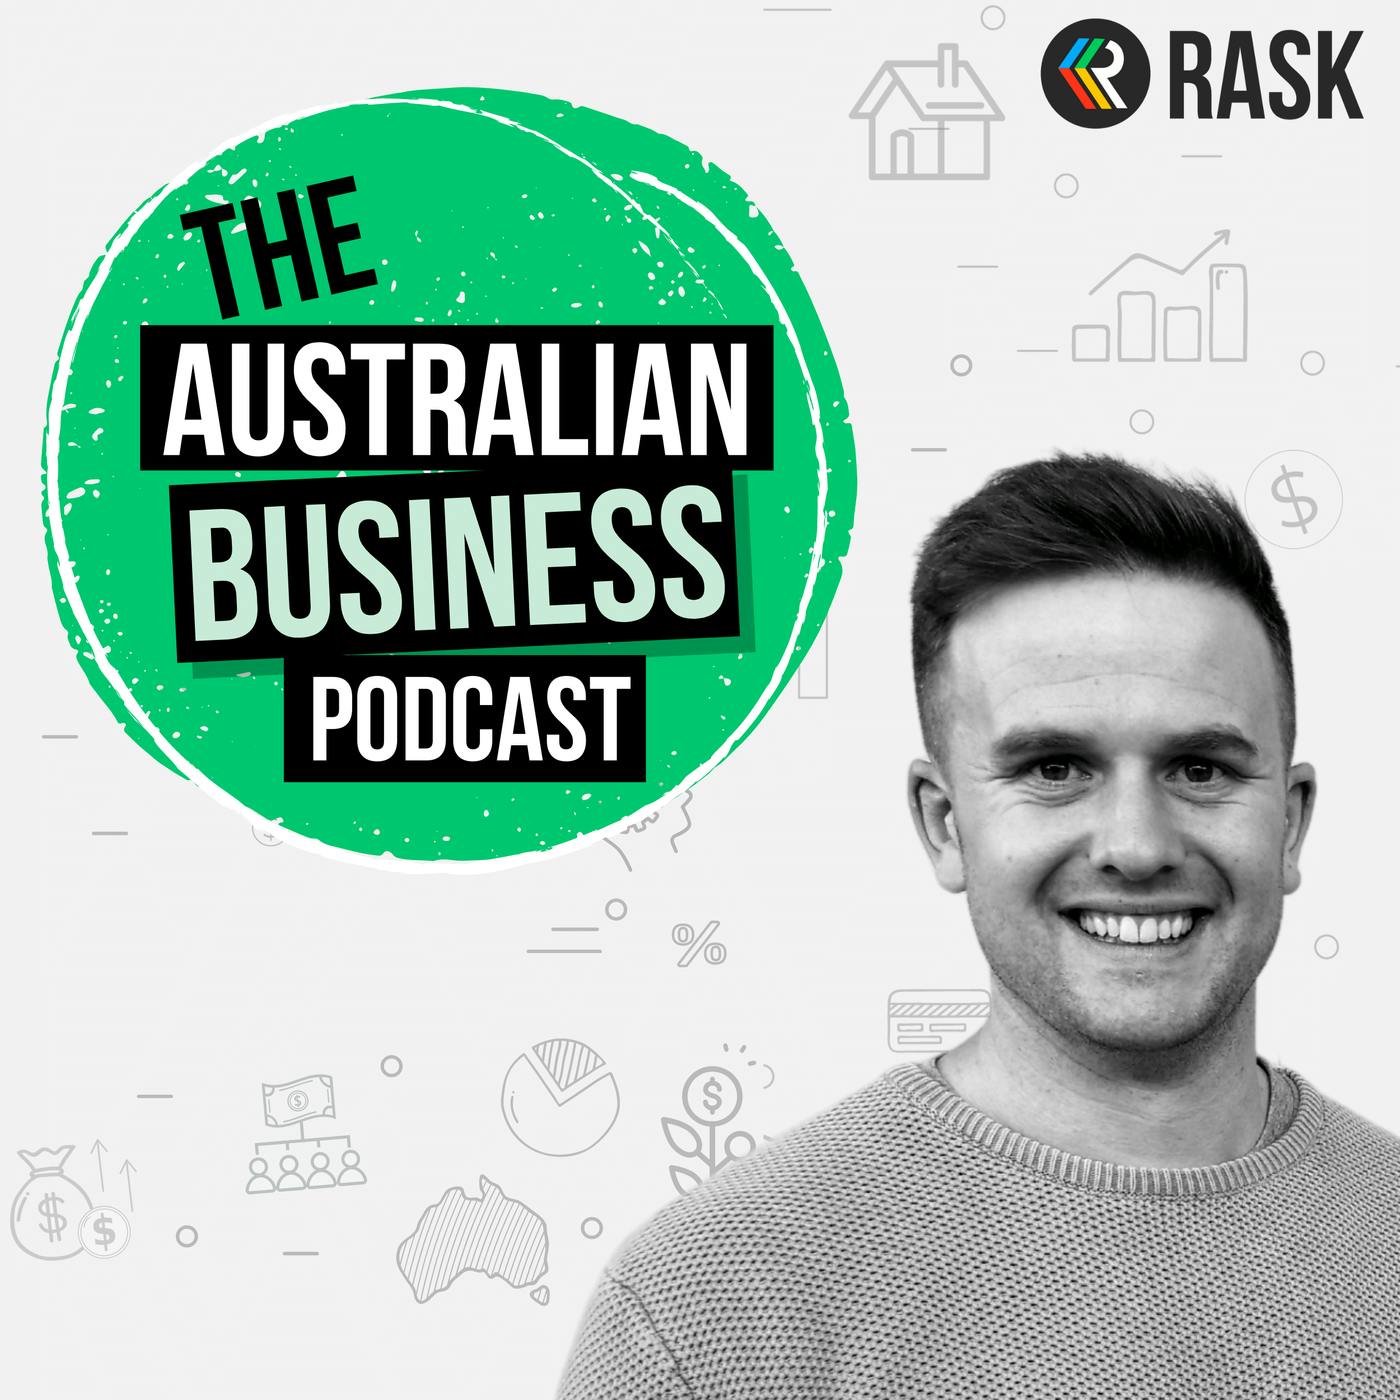 Introducing the Rask Business Podcast